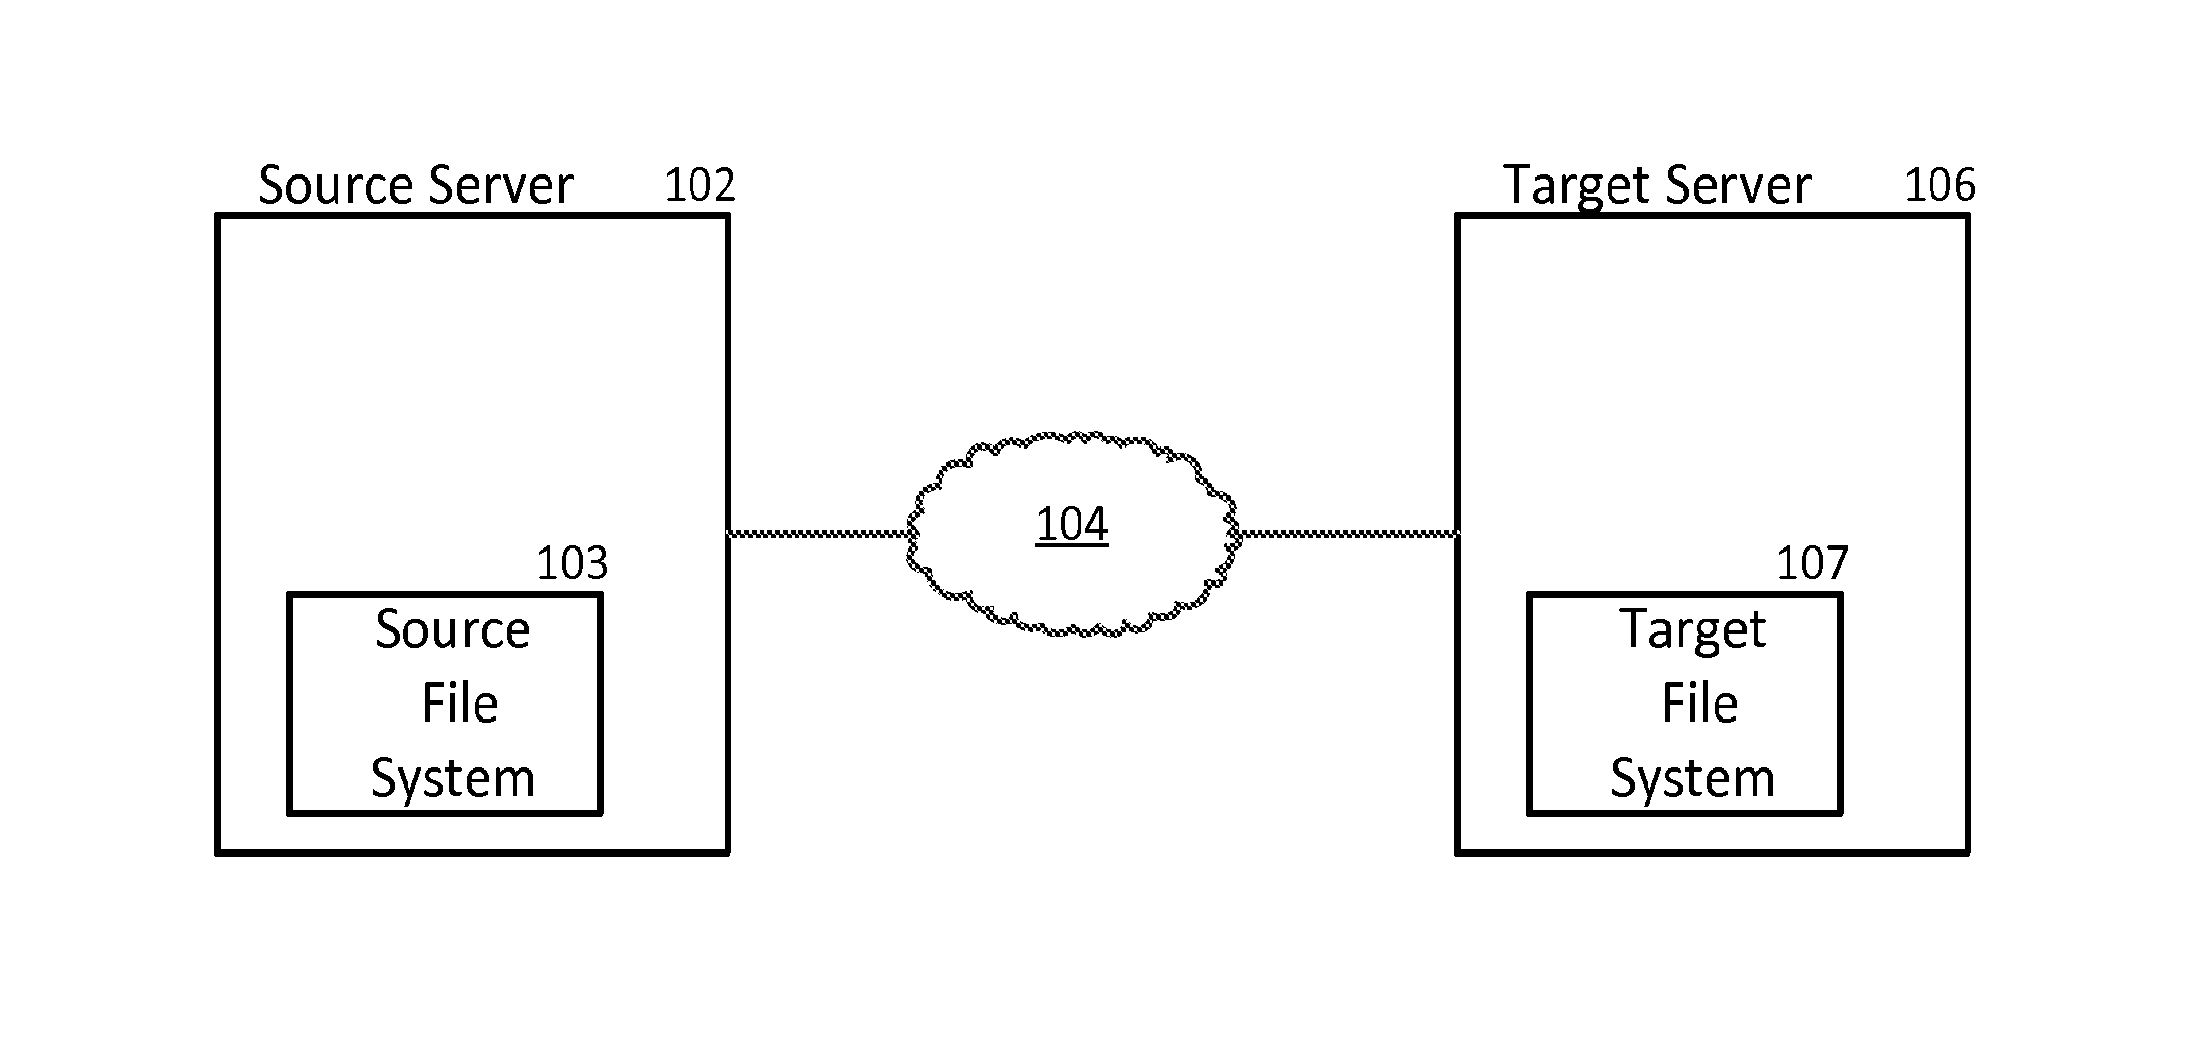 Object-Level Replication of Cloned Objects in a Data Storage System